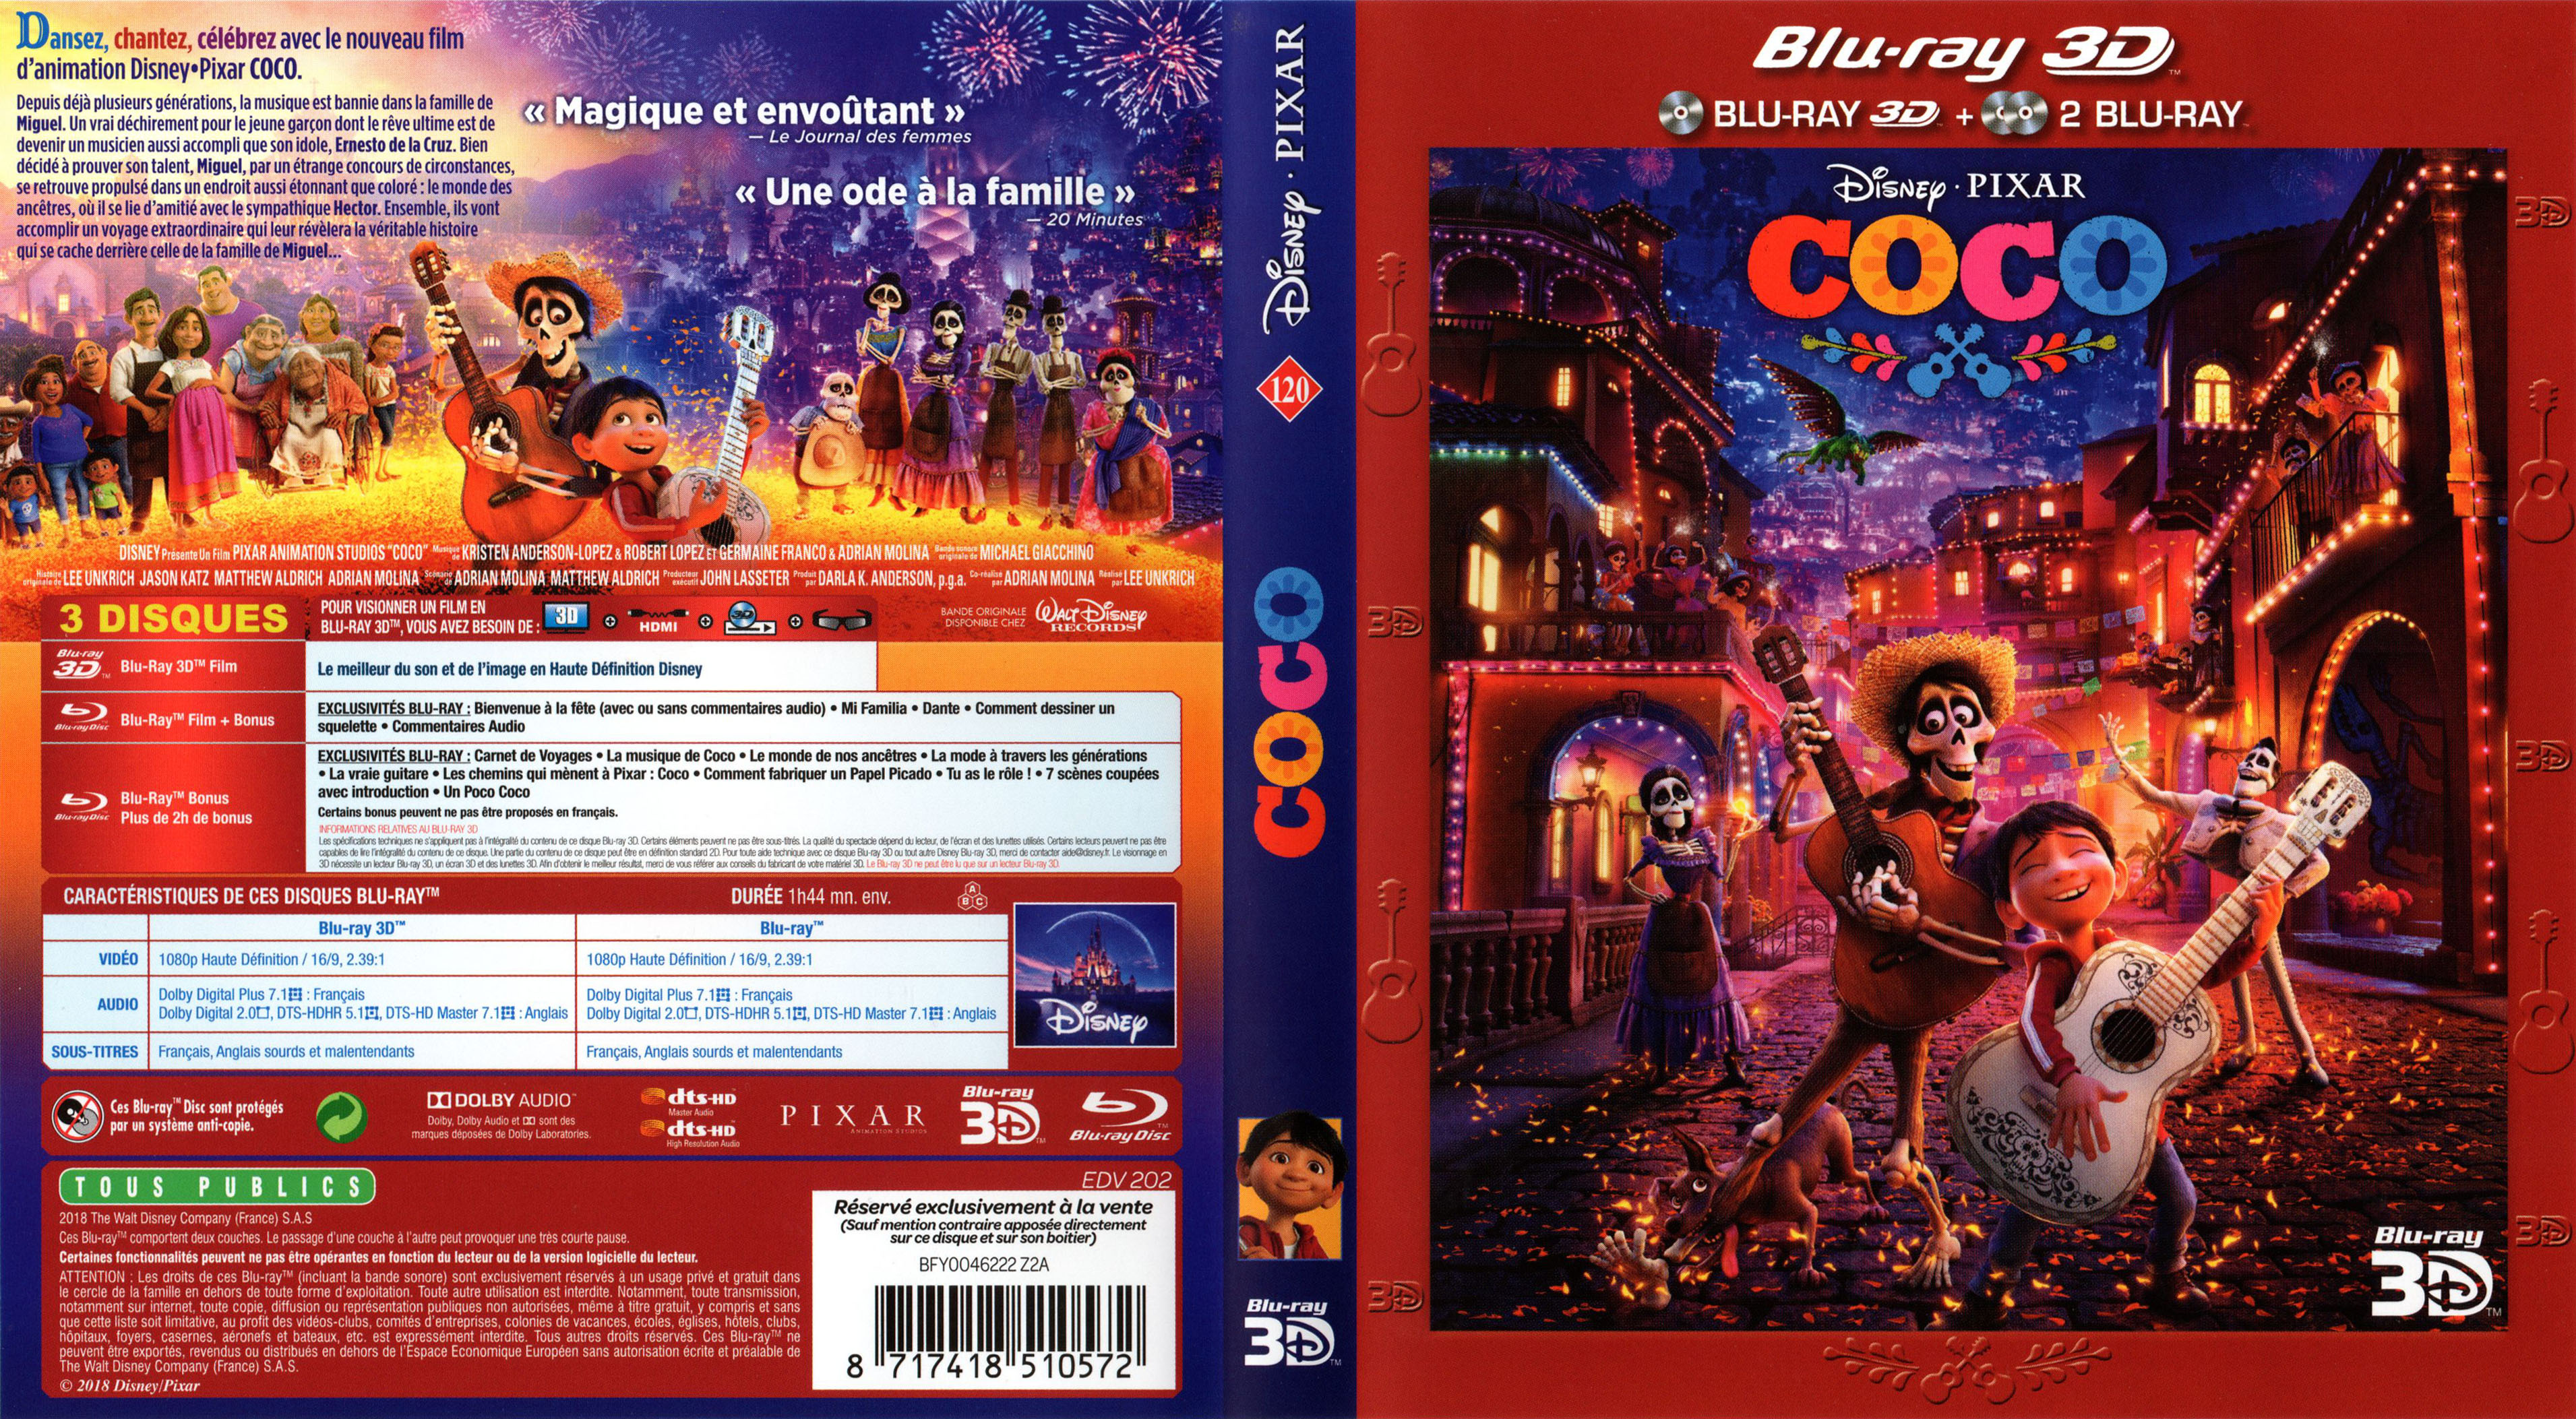 Jaquette DVD Coco 3D (2018) (BLU-RAY)